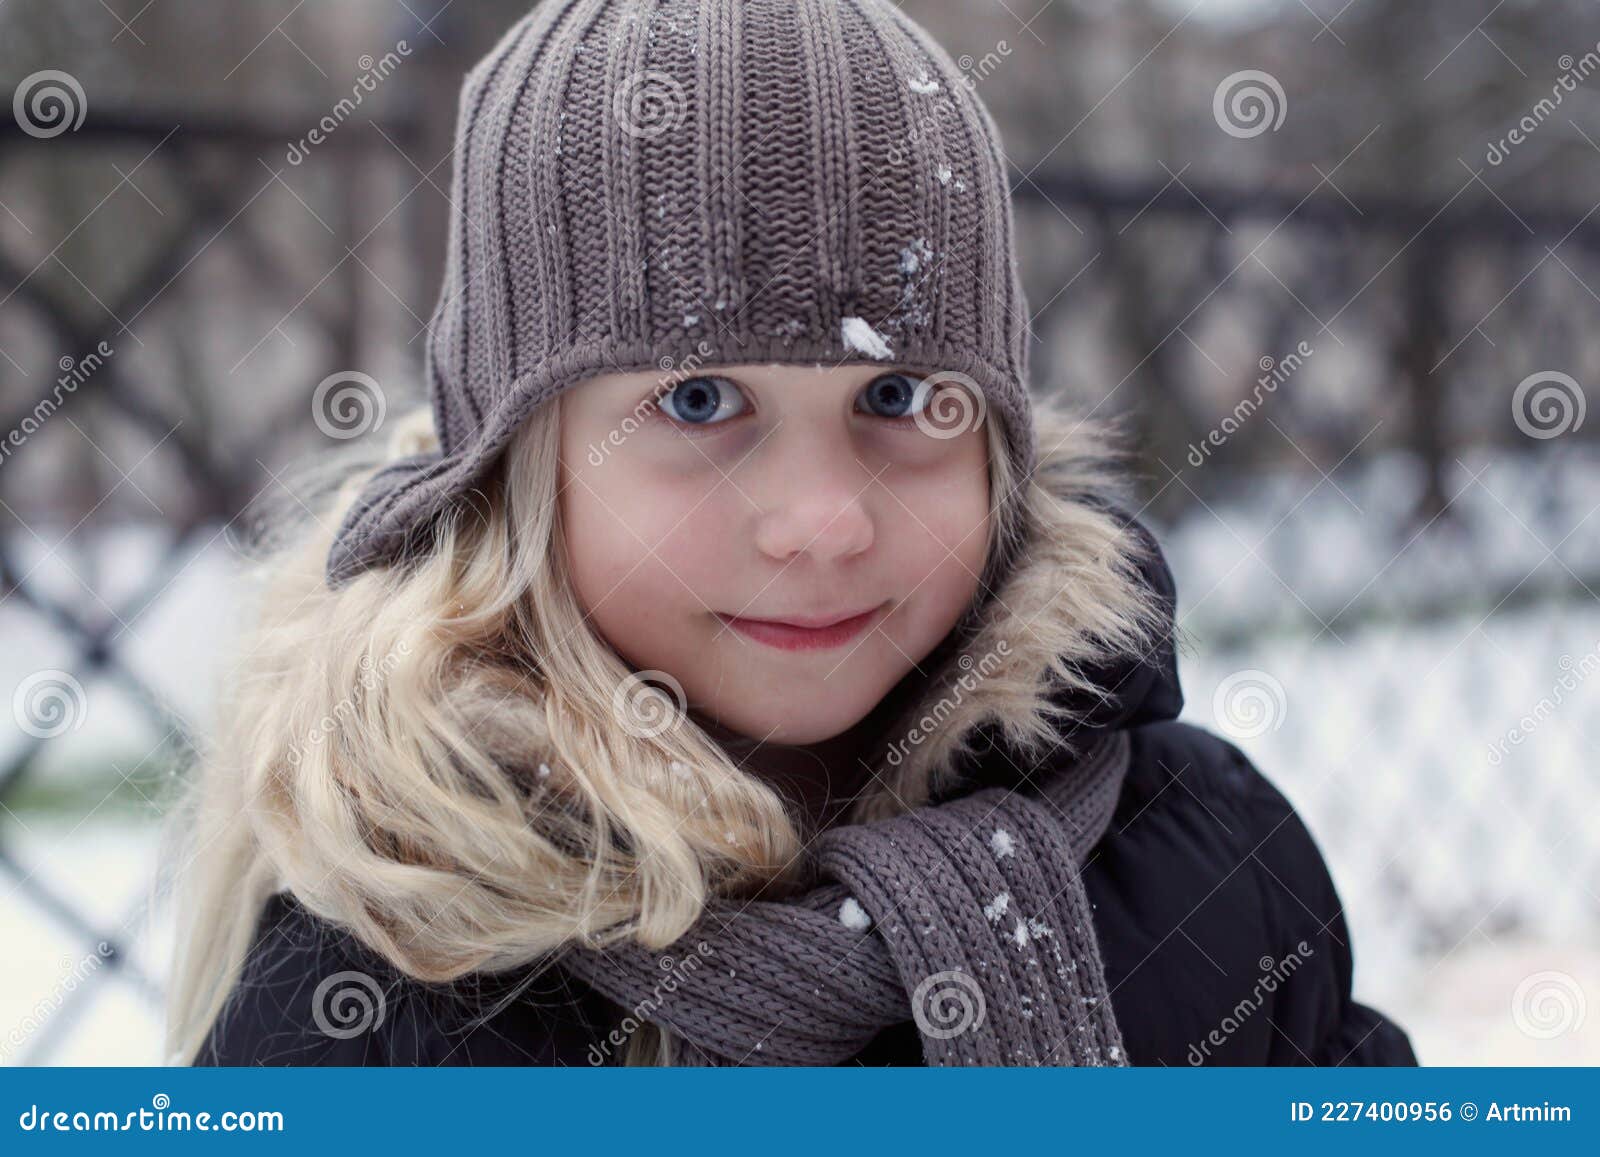 Winter Portrait of Happy Little Girl Wearing Knitted Hat, Scarf and ...